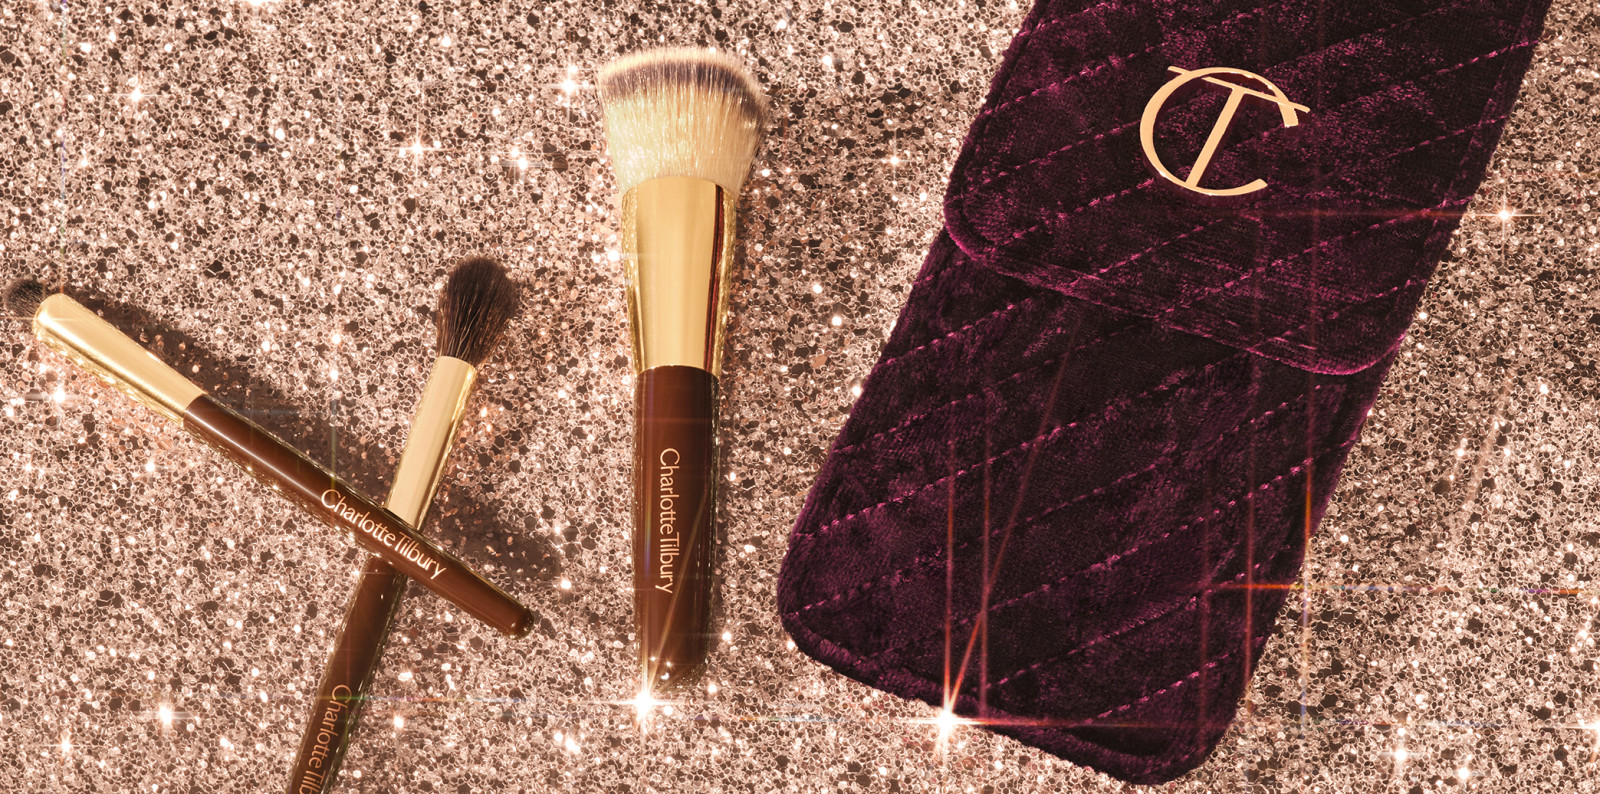 A face blending brush with two eyeshadow brushes, one for smudging and the other for blending eyeshadow, in gold and dark brown colour scheme along with a makeup brush bag in a dark crimson and gold colour scheme.